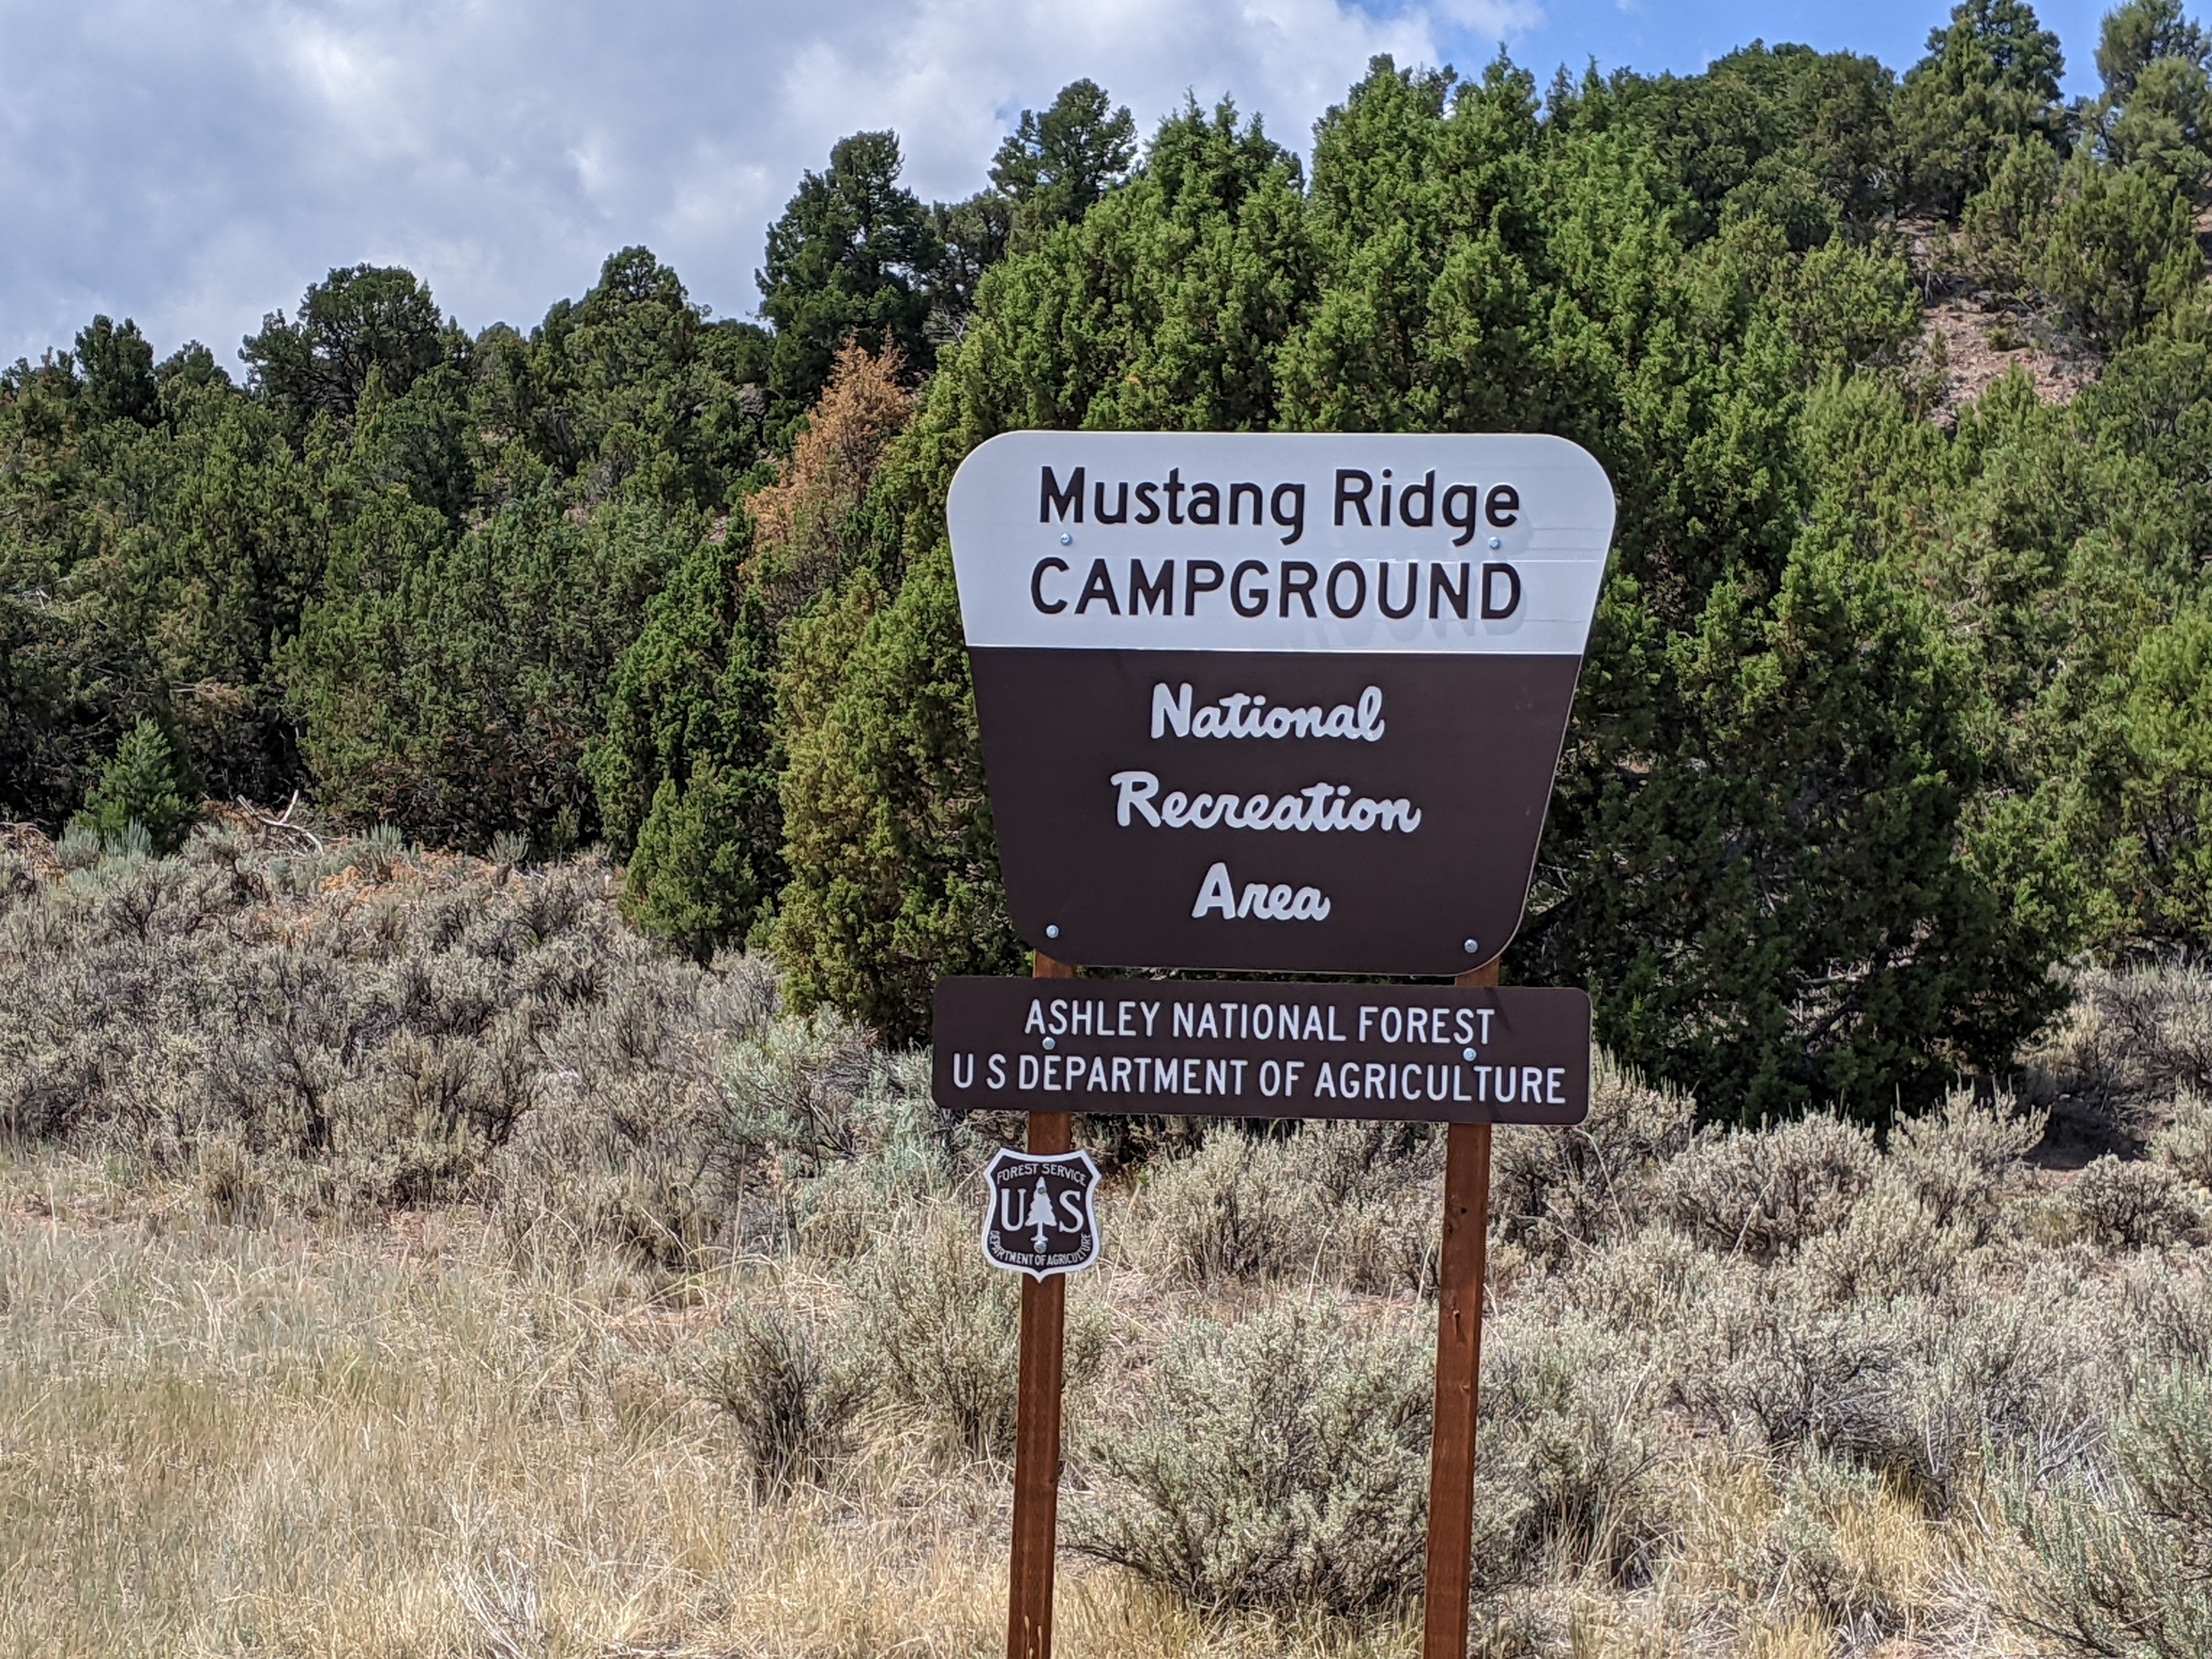 Camper submitted image from Mustang Ridge Campground - 5